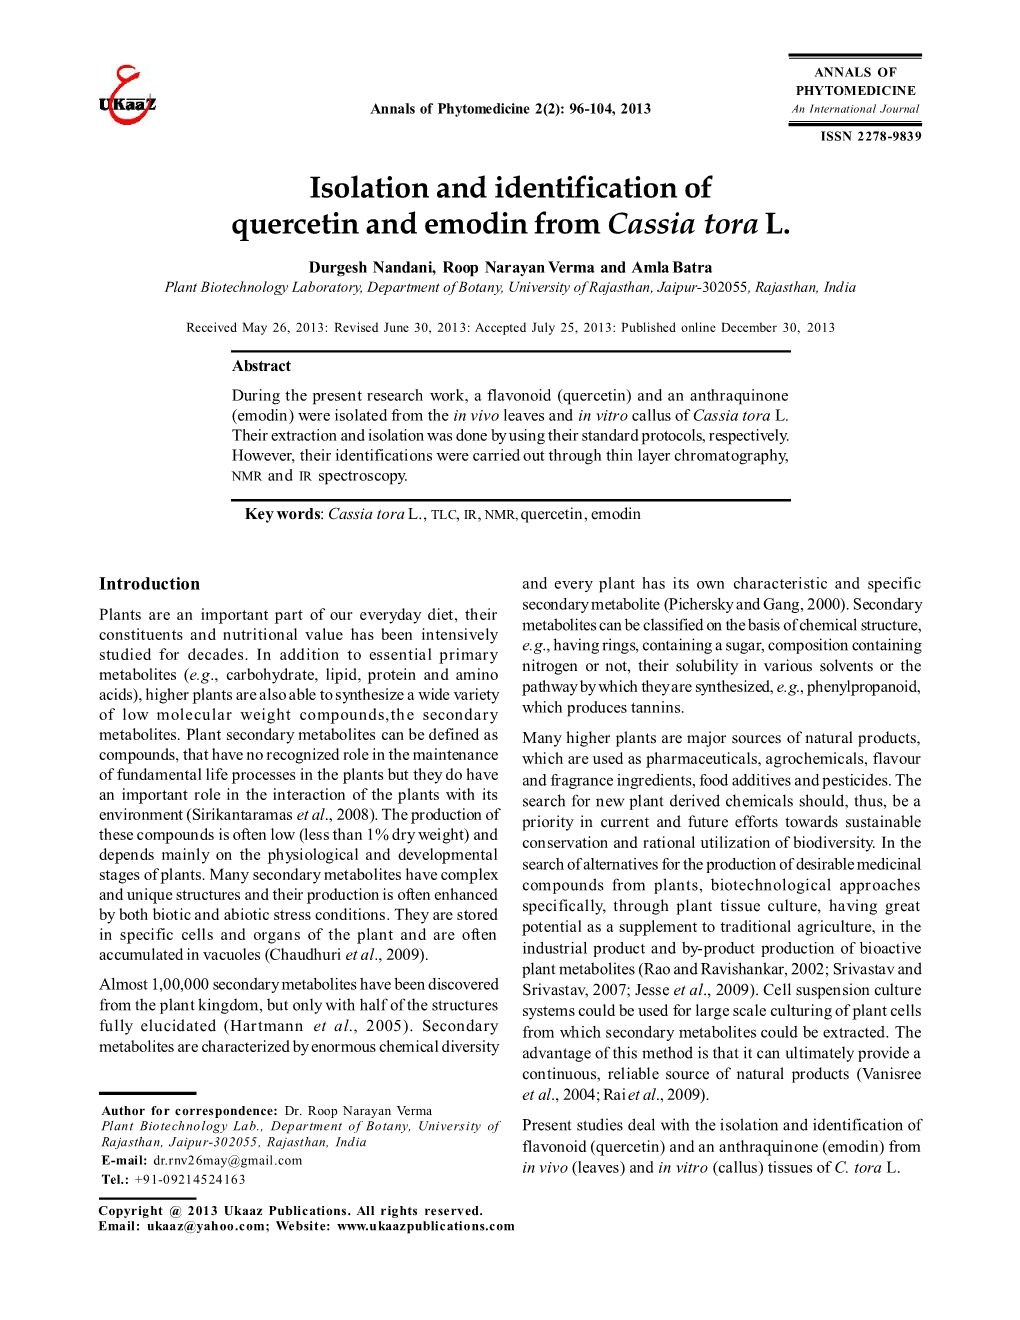 Isolation and Identification of Quercetin and Emodin from Cassia Tora L